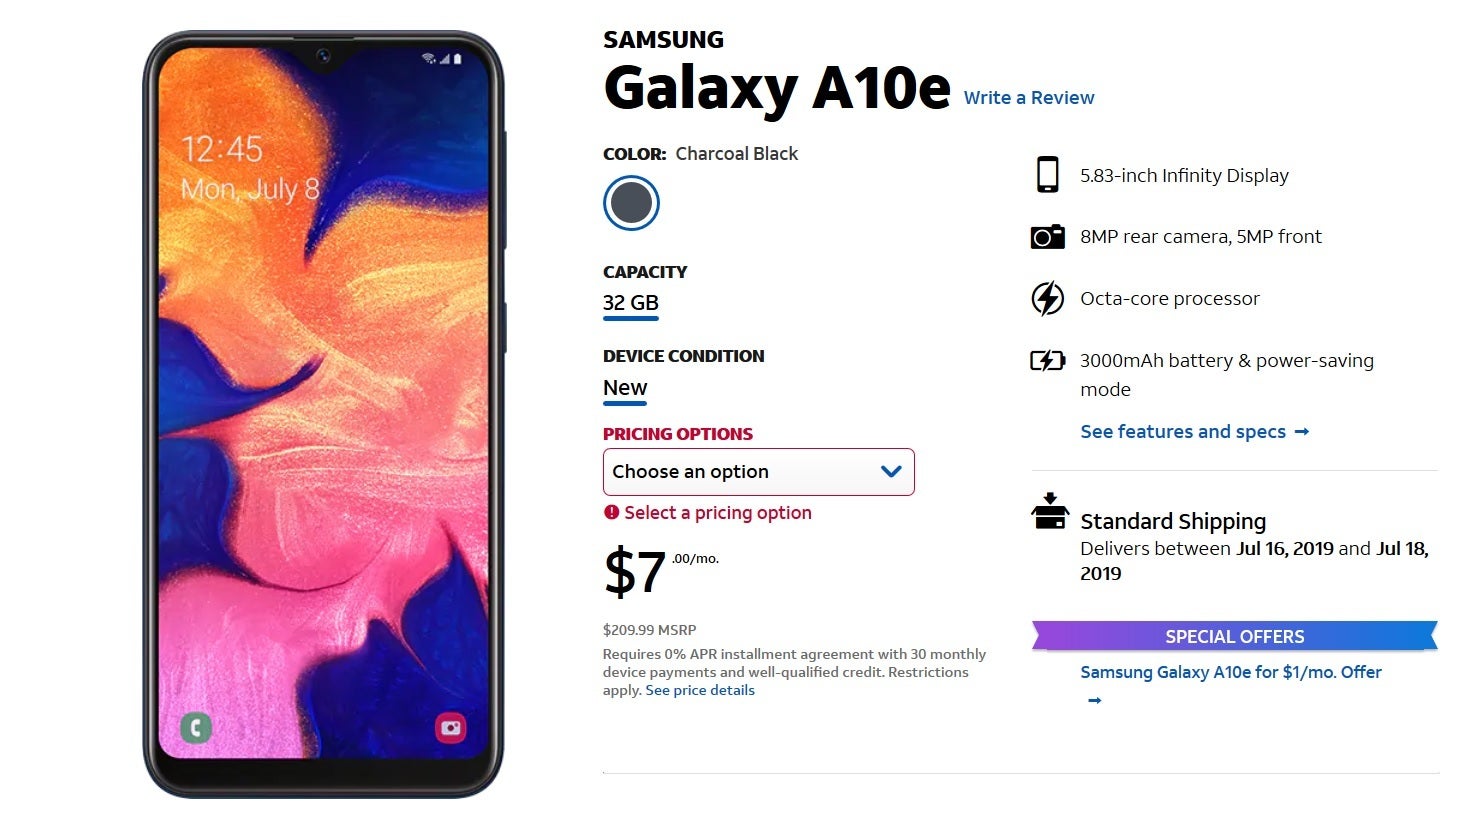 AT&amp;T is now selling the Samsung Galaxy A10e - Samsung Galaxy A10e now available at AT&T; phone is $1 per month with the addition of a new line